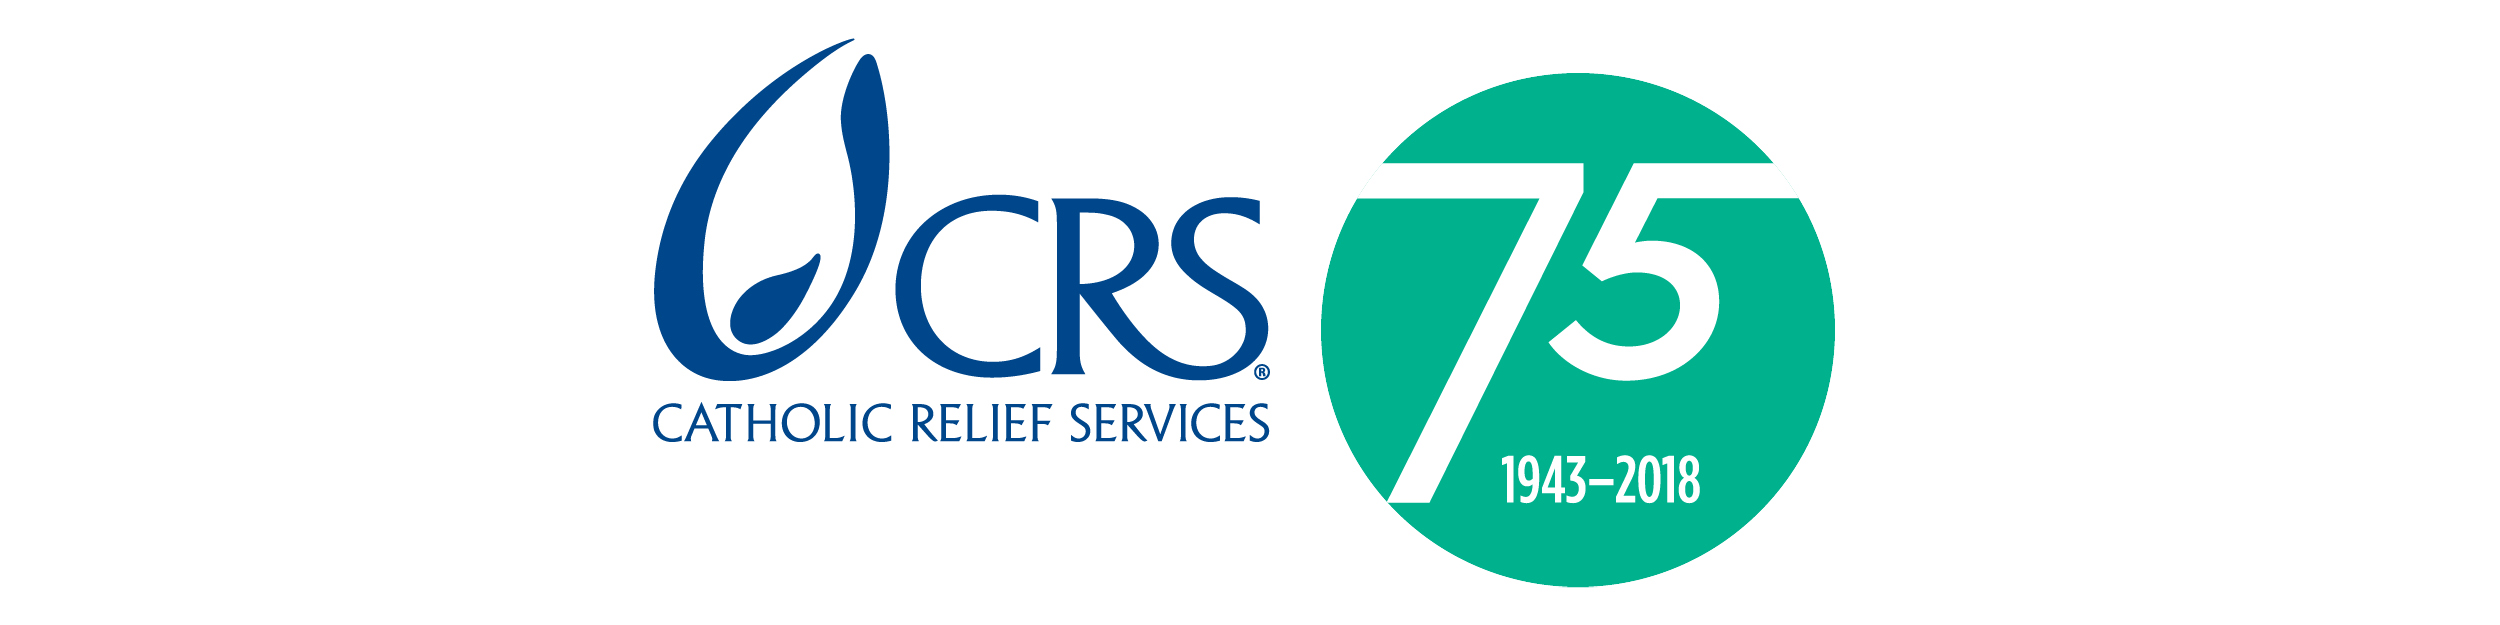 Catholic Relief Services- logo- 75 years